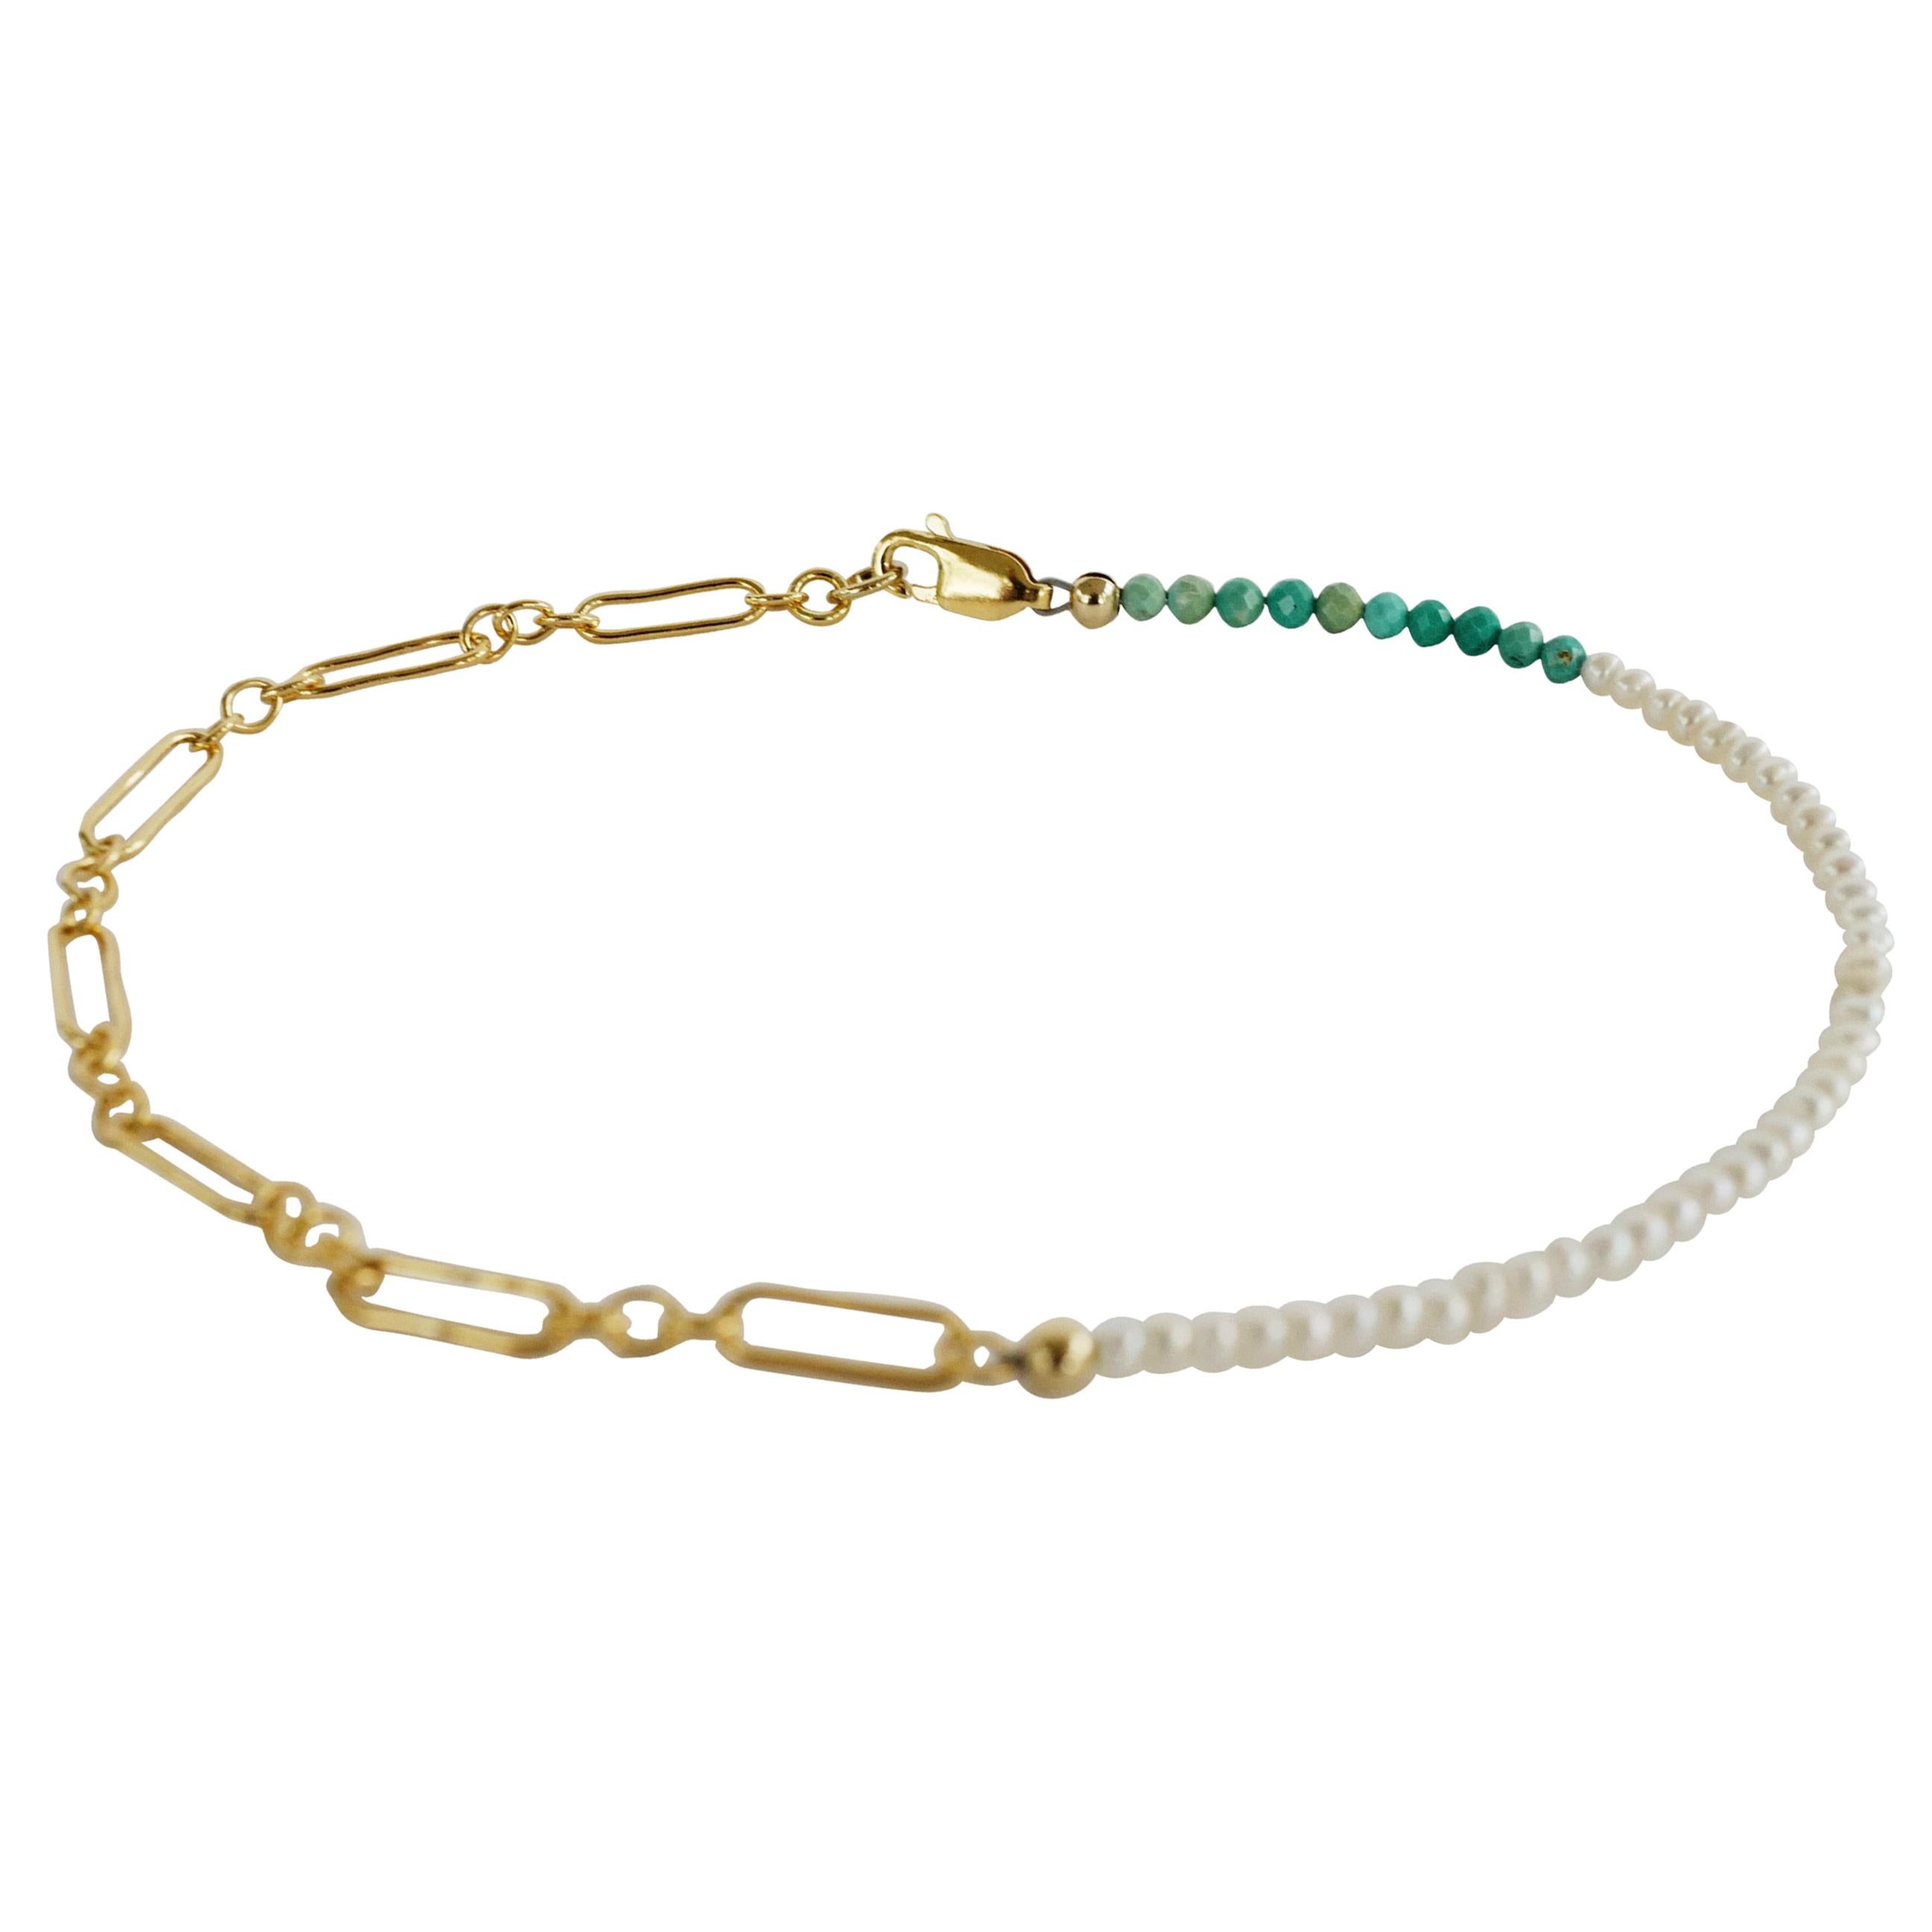 Turquoise White Pearl Ankle Bracelet Gold Tone Chain Beaded J Dauphin For Sale